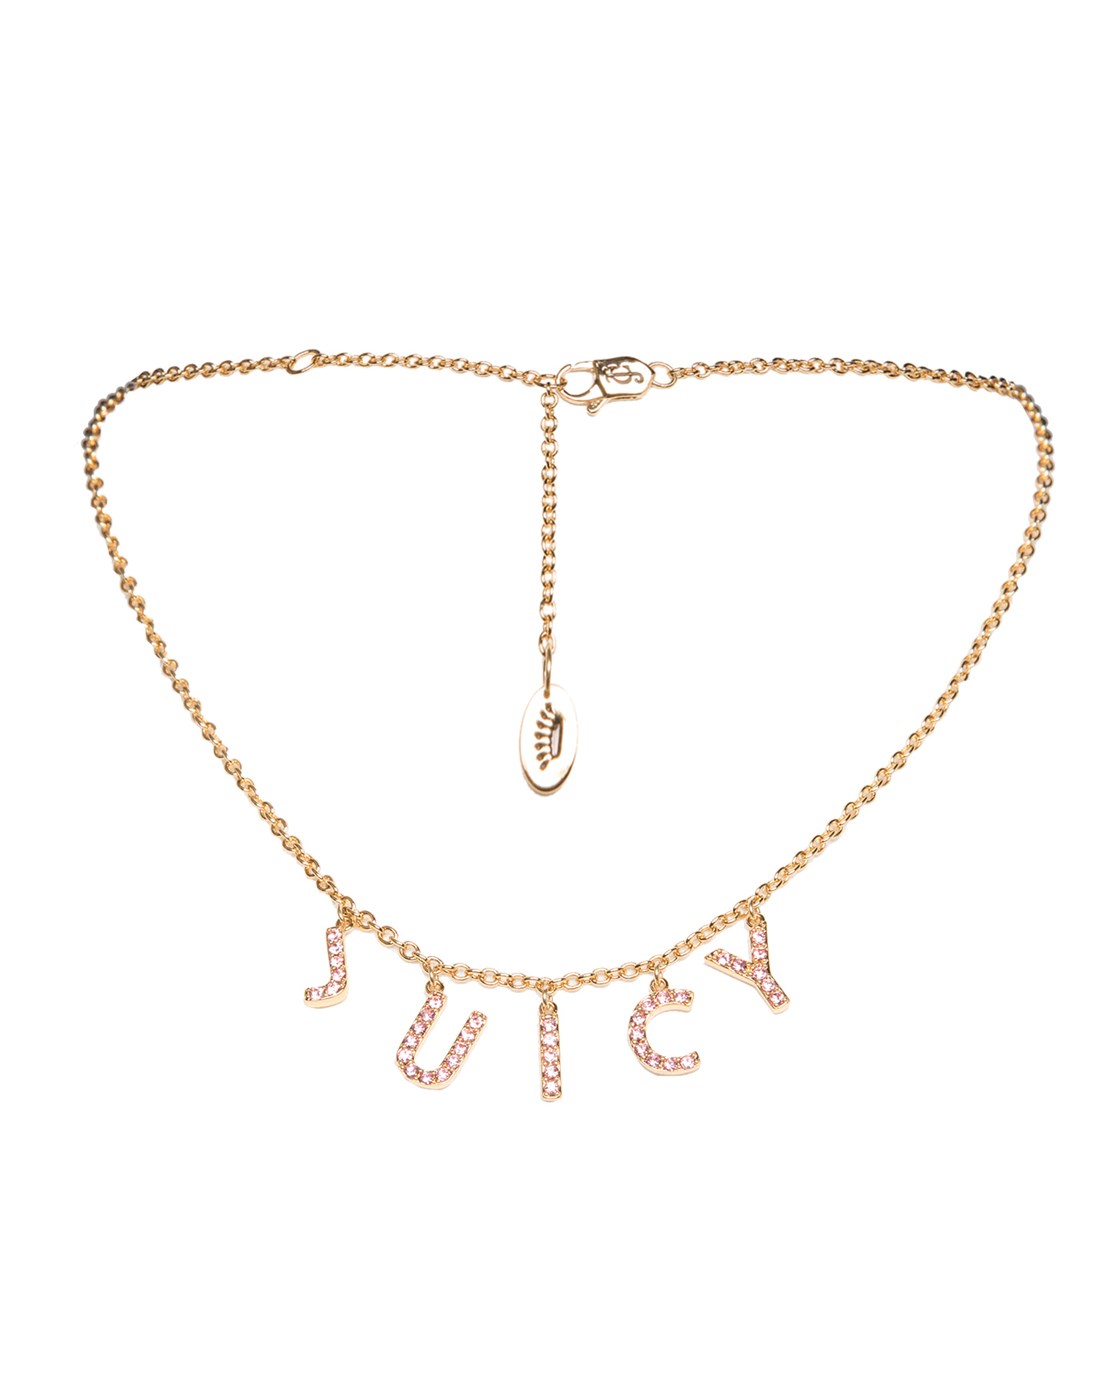 Juicy Couture PAVE CHARM LUXE WISHES NECKLACE